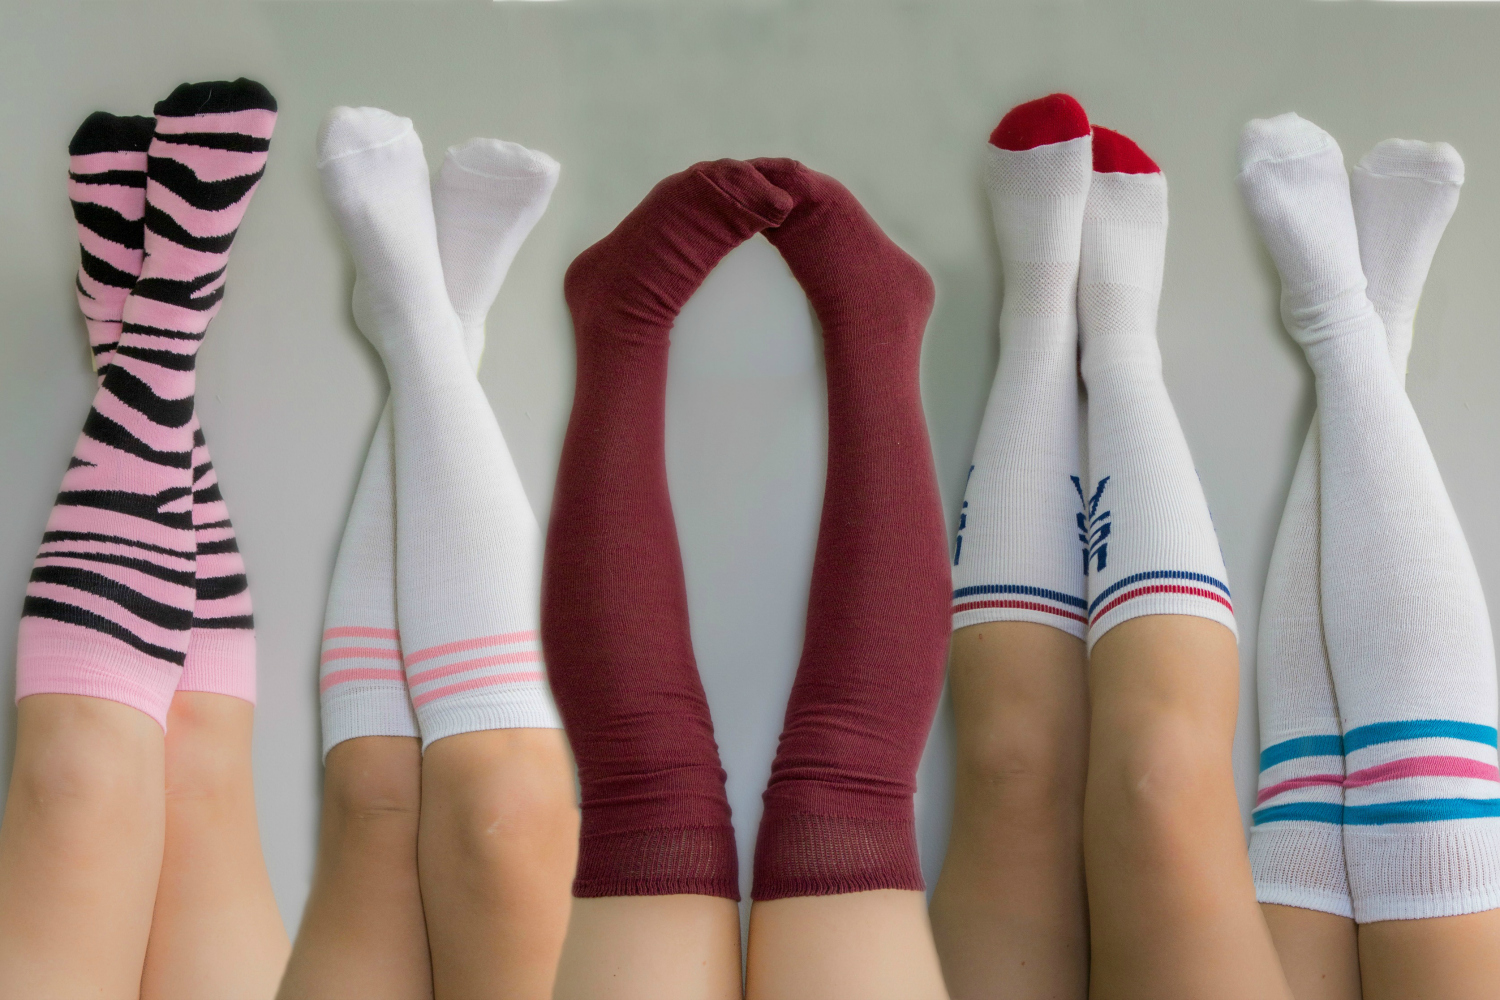 Five pairs of legs raised against a grey background, each donning unique knee-high socks, including zebra stripes, solid colors, and striped patterns